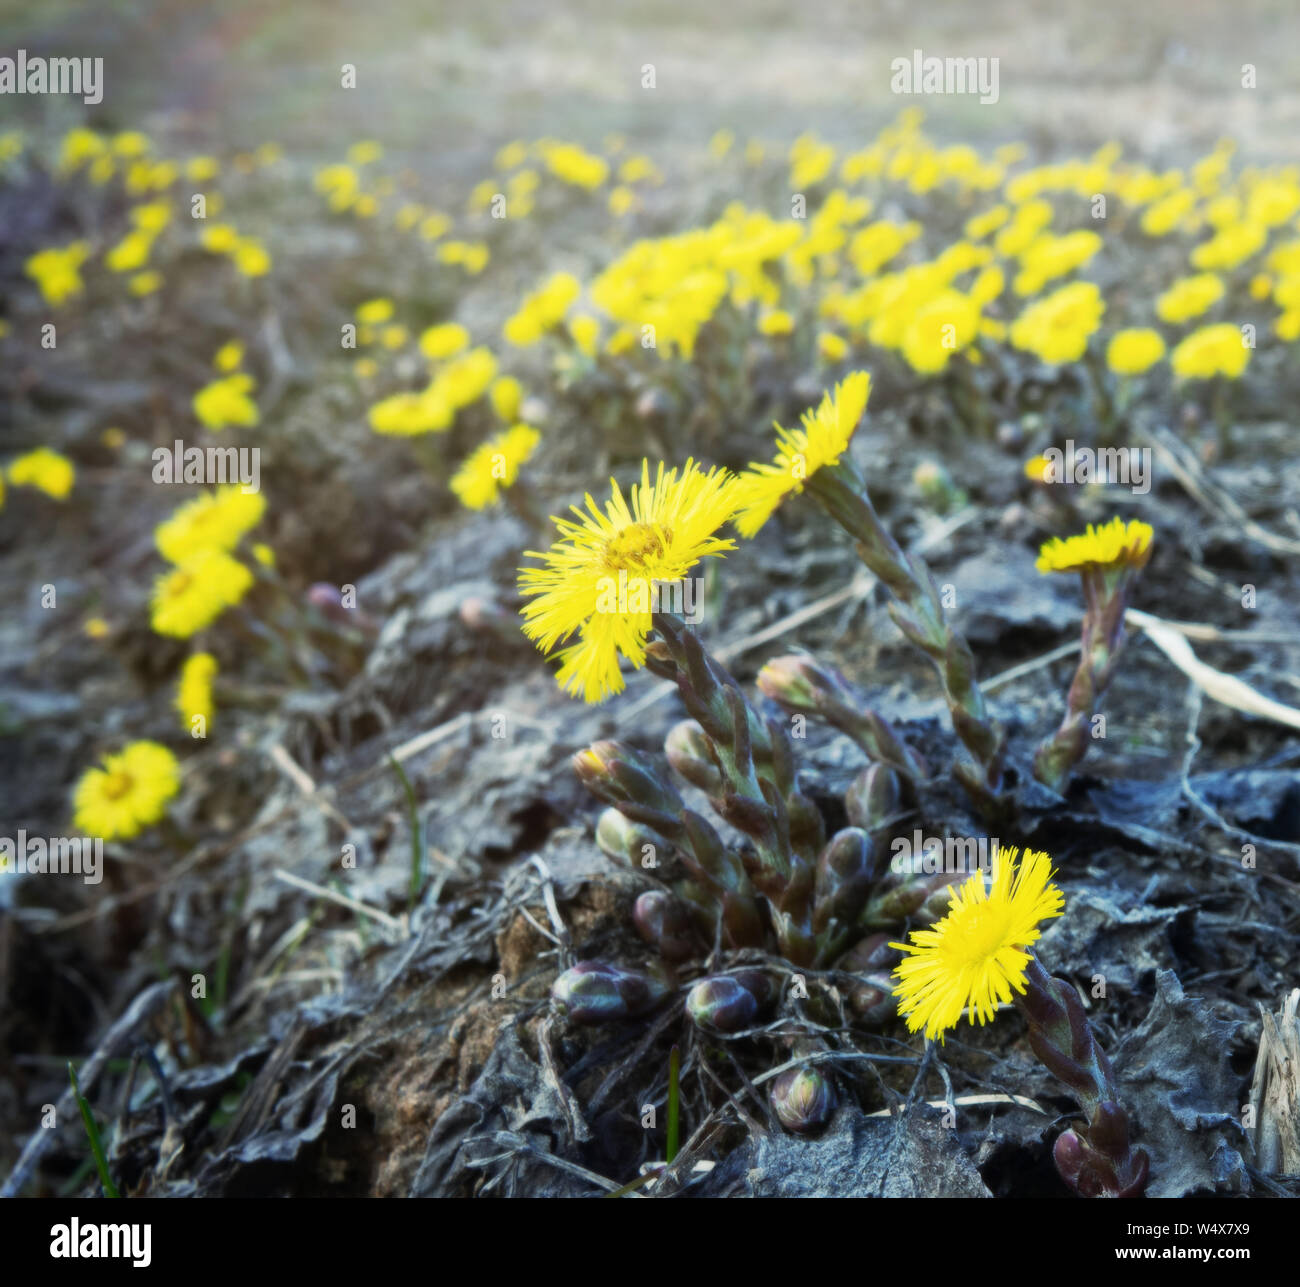 The first spring Sunny flower in Northern Europe, sun symbol. Yellow fields of flowering coughwort ( common bull's-foot, Tussilago farfara) Stock Photo